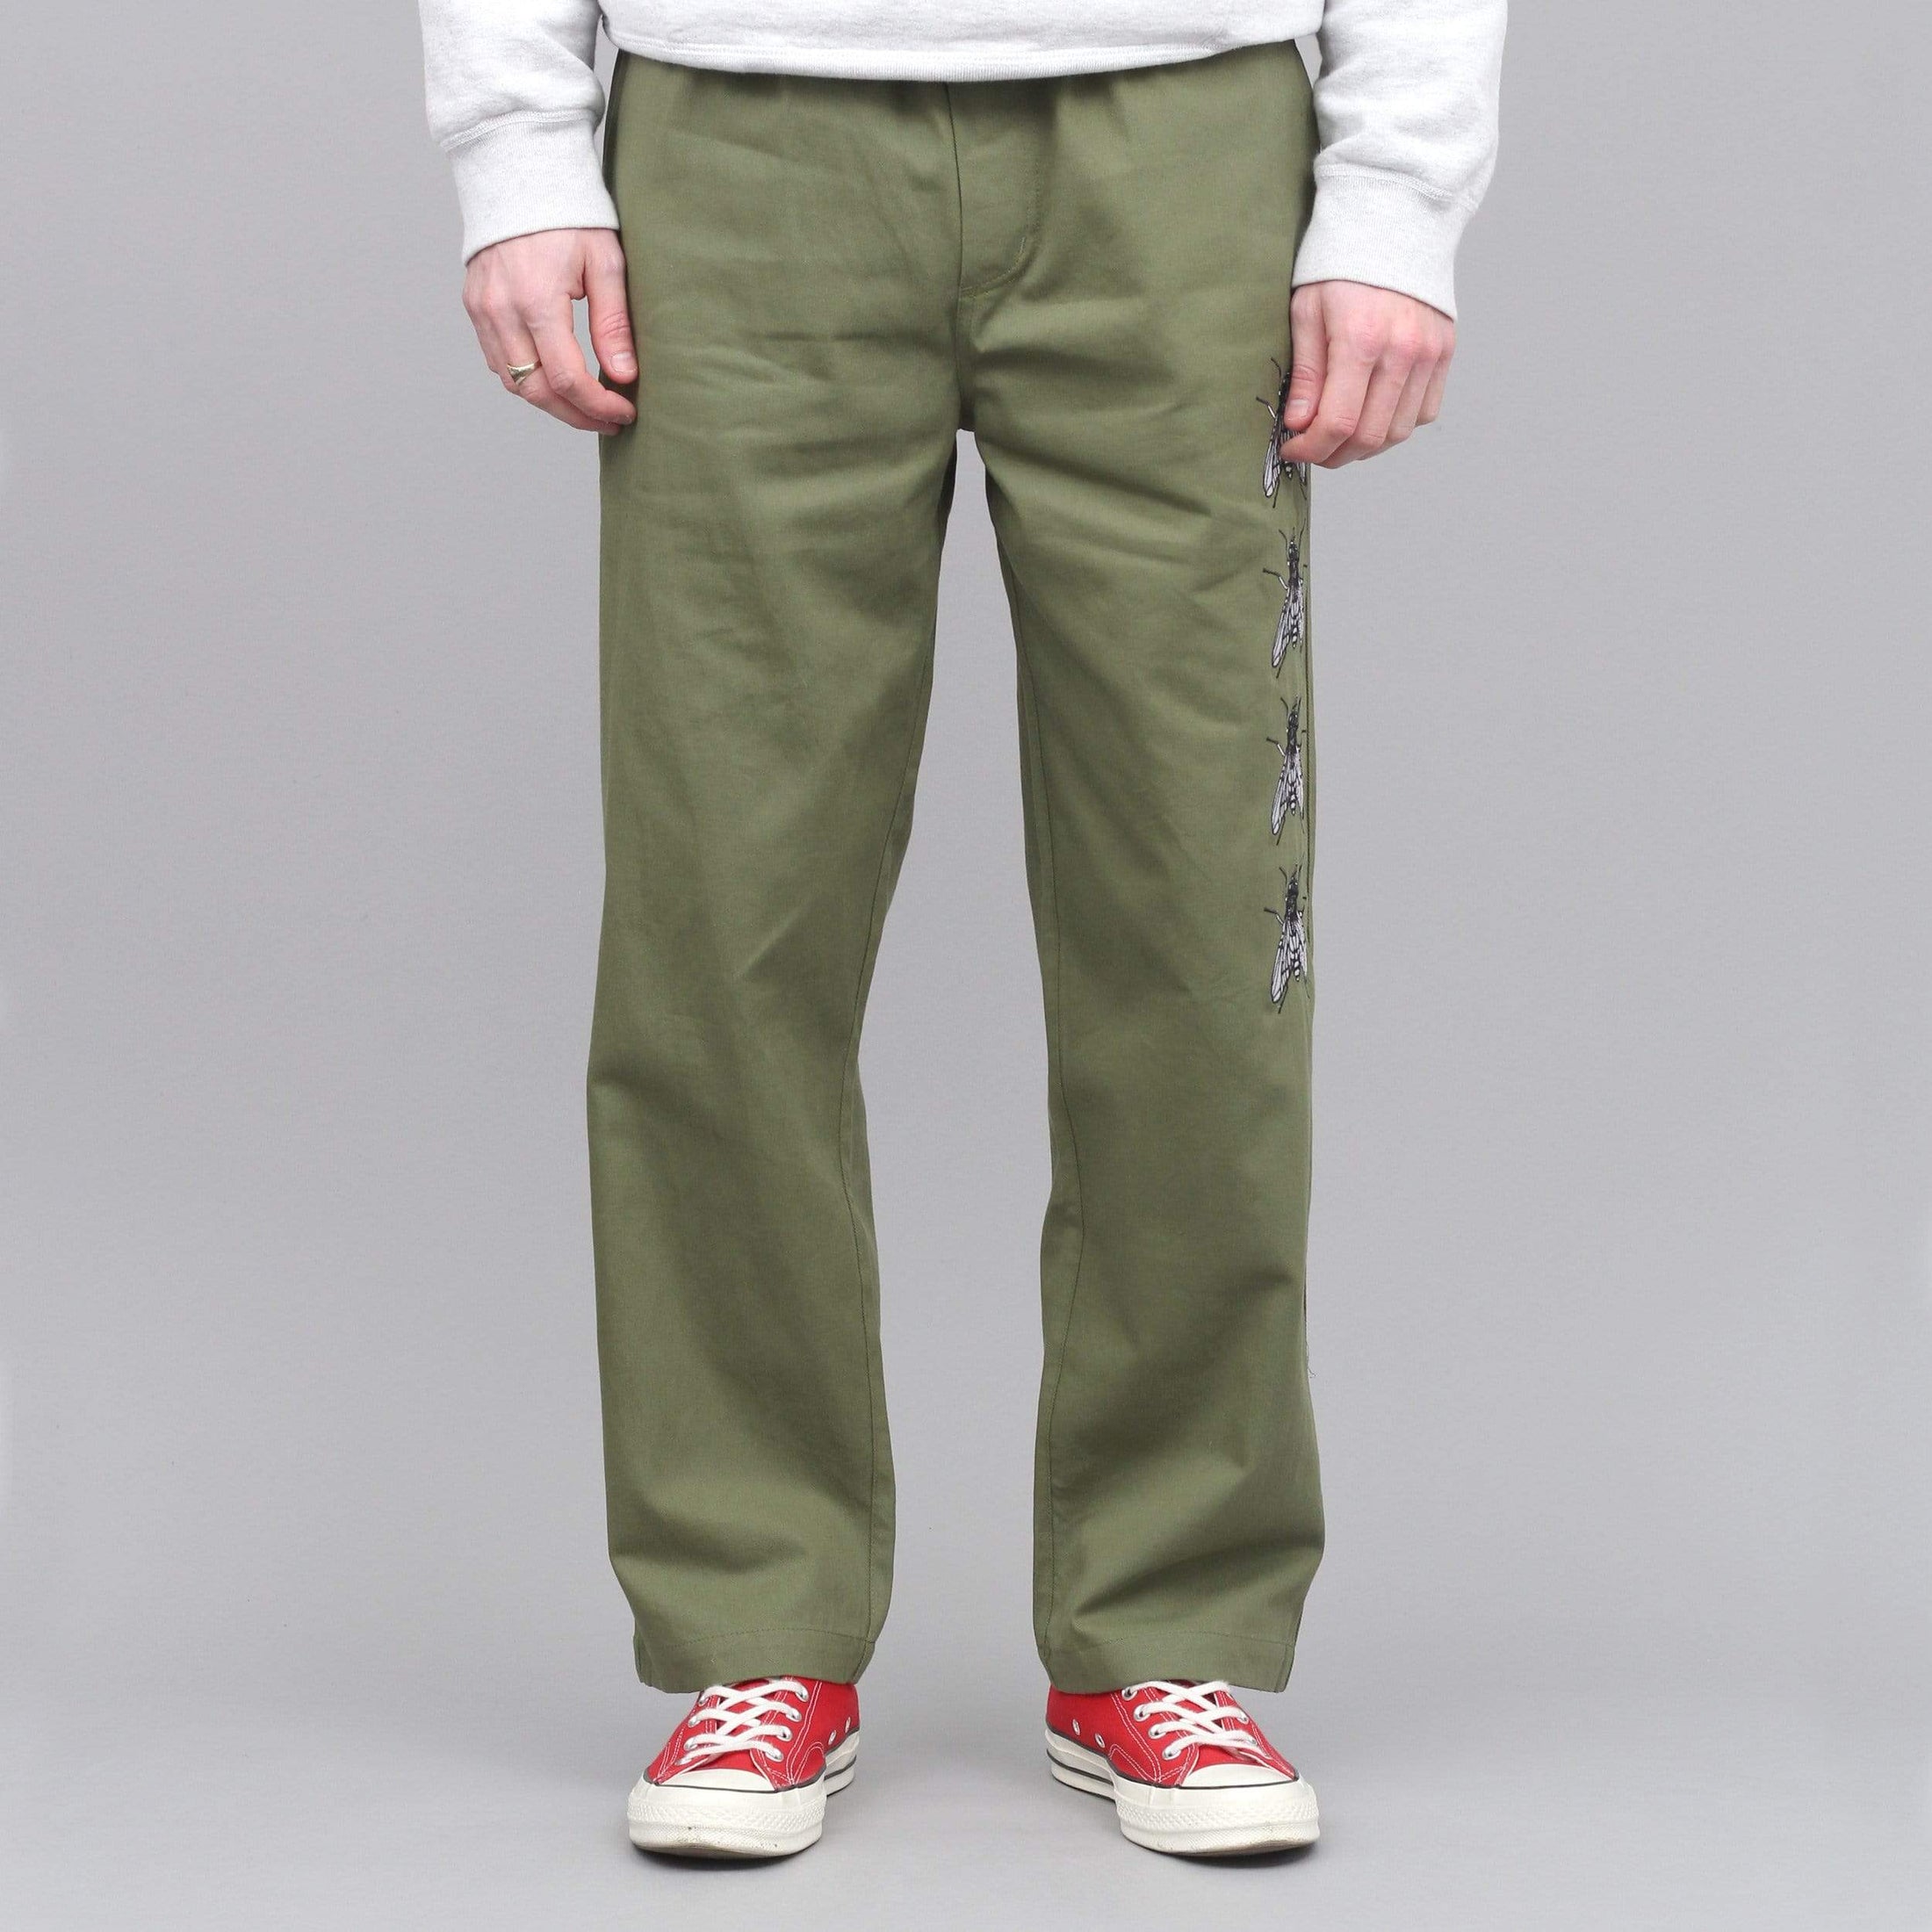 Butter Goods Swarm Embroidered Pants Army